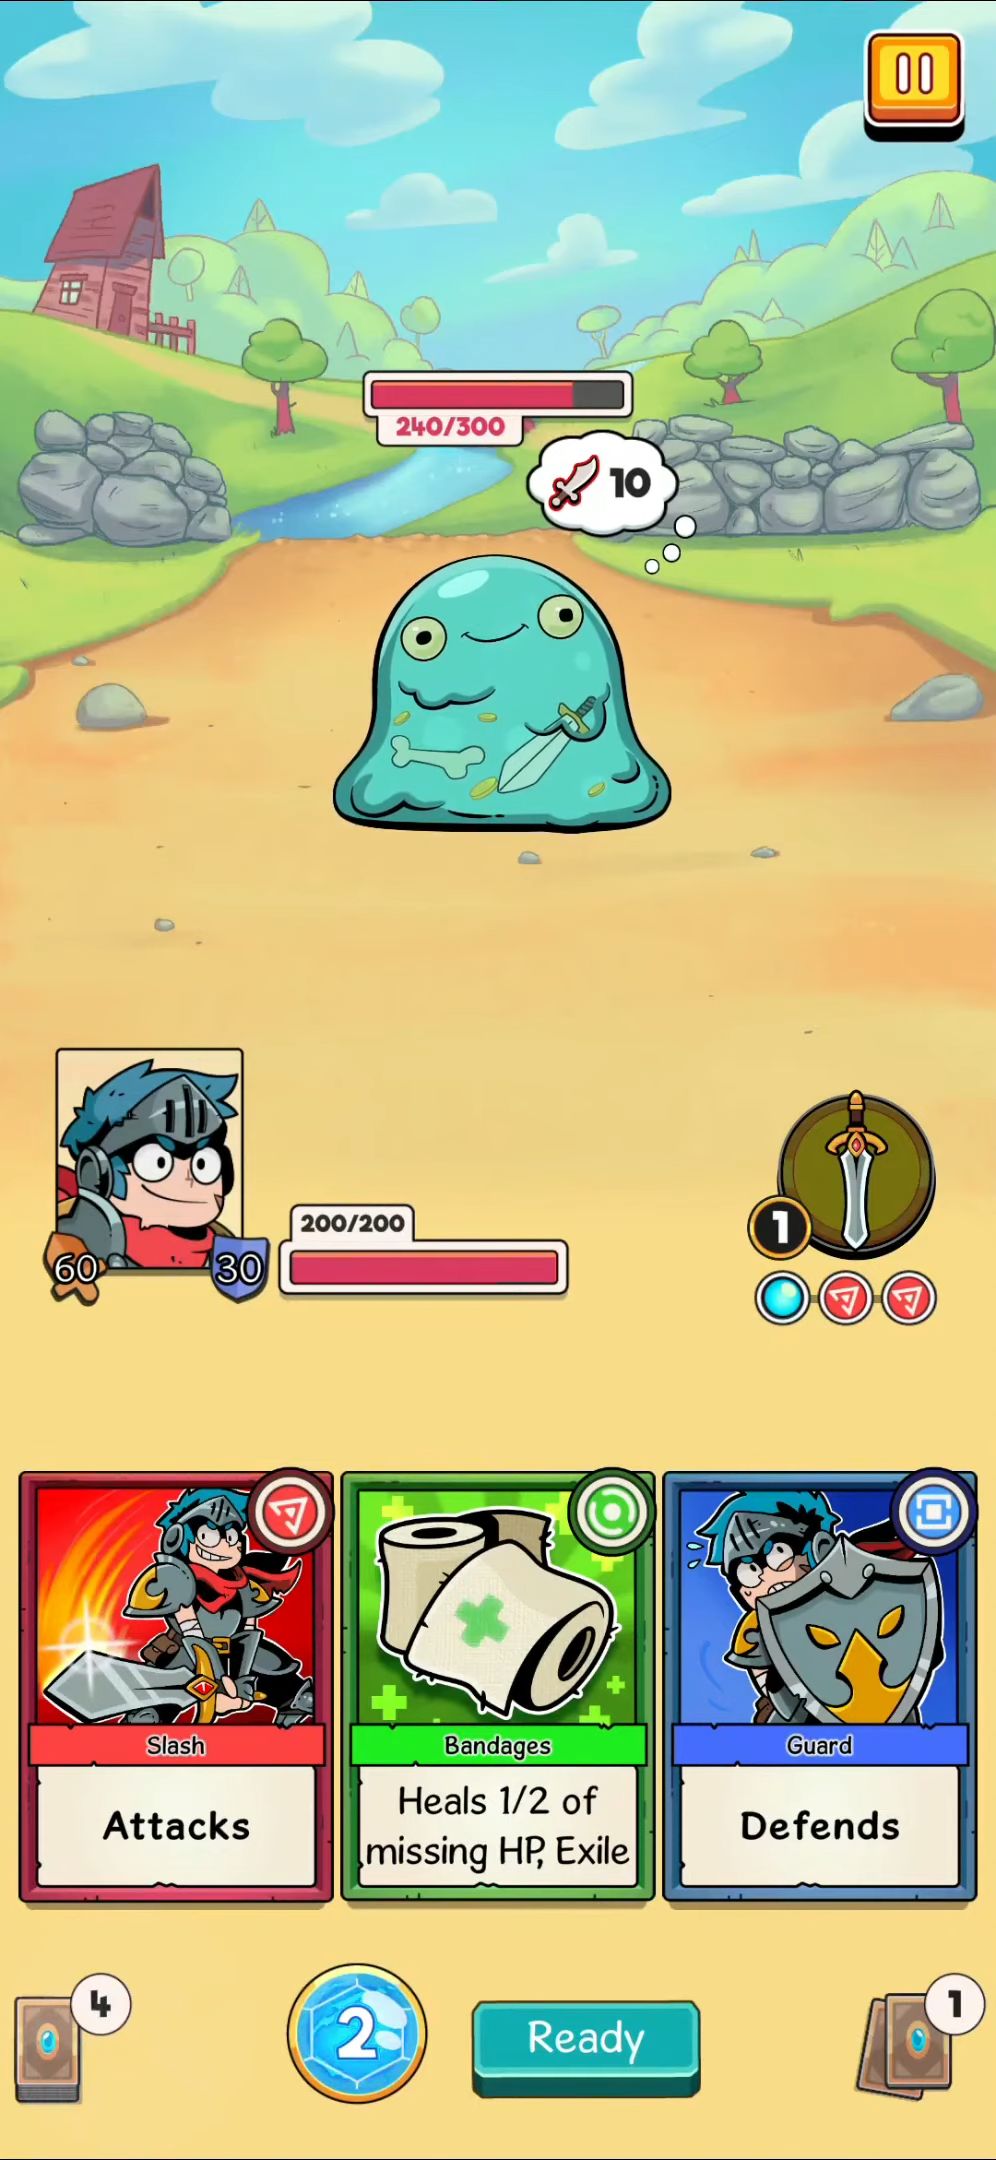 Gameplay of the Card Guardians: Deck Building Roguelike Card Game for Android phone or tablet.